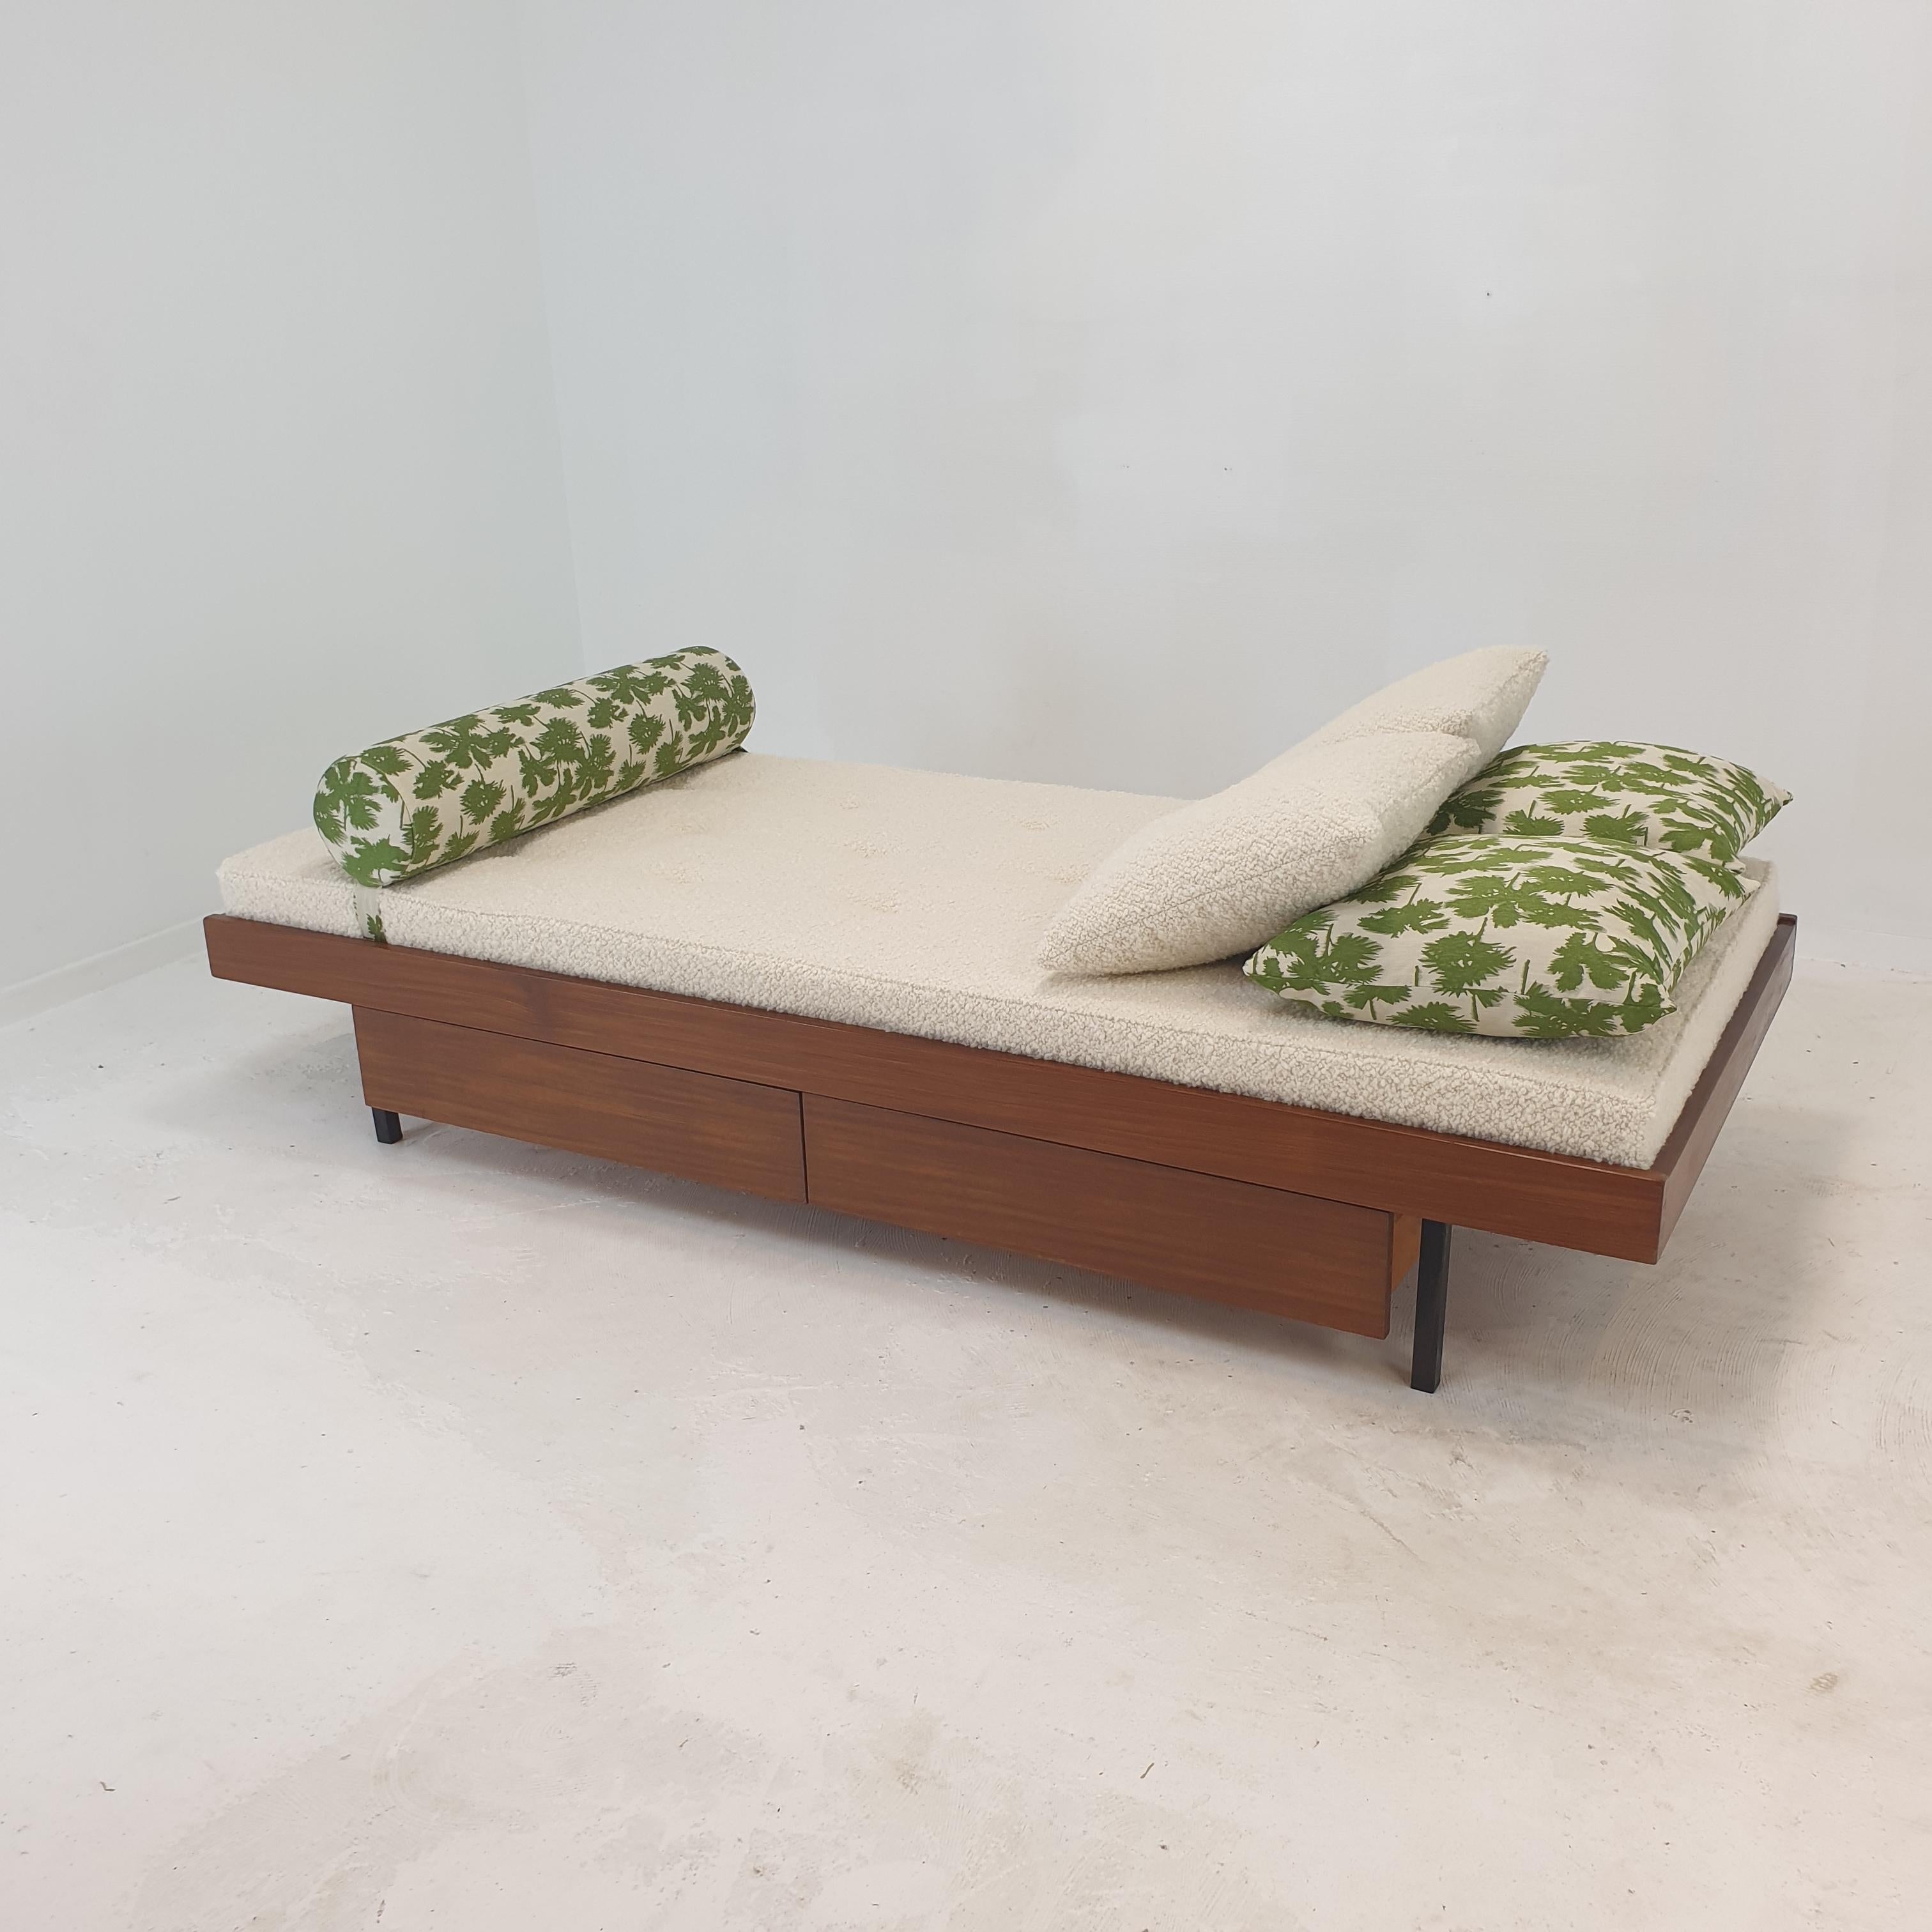 Teak Daybed with Dedar Cushions and Bolster, 1960s For Sale 1